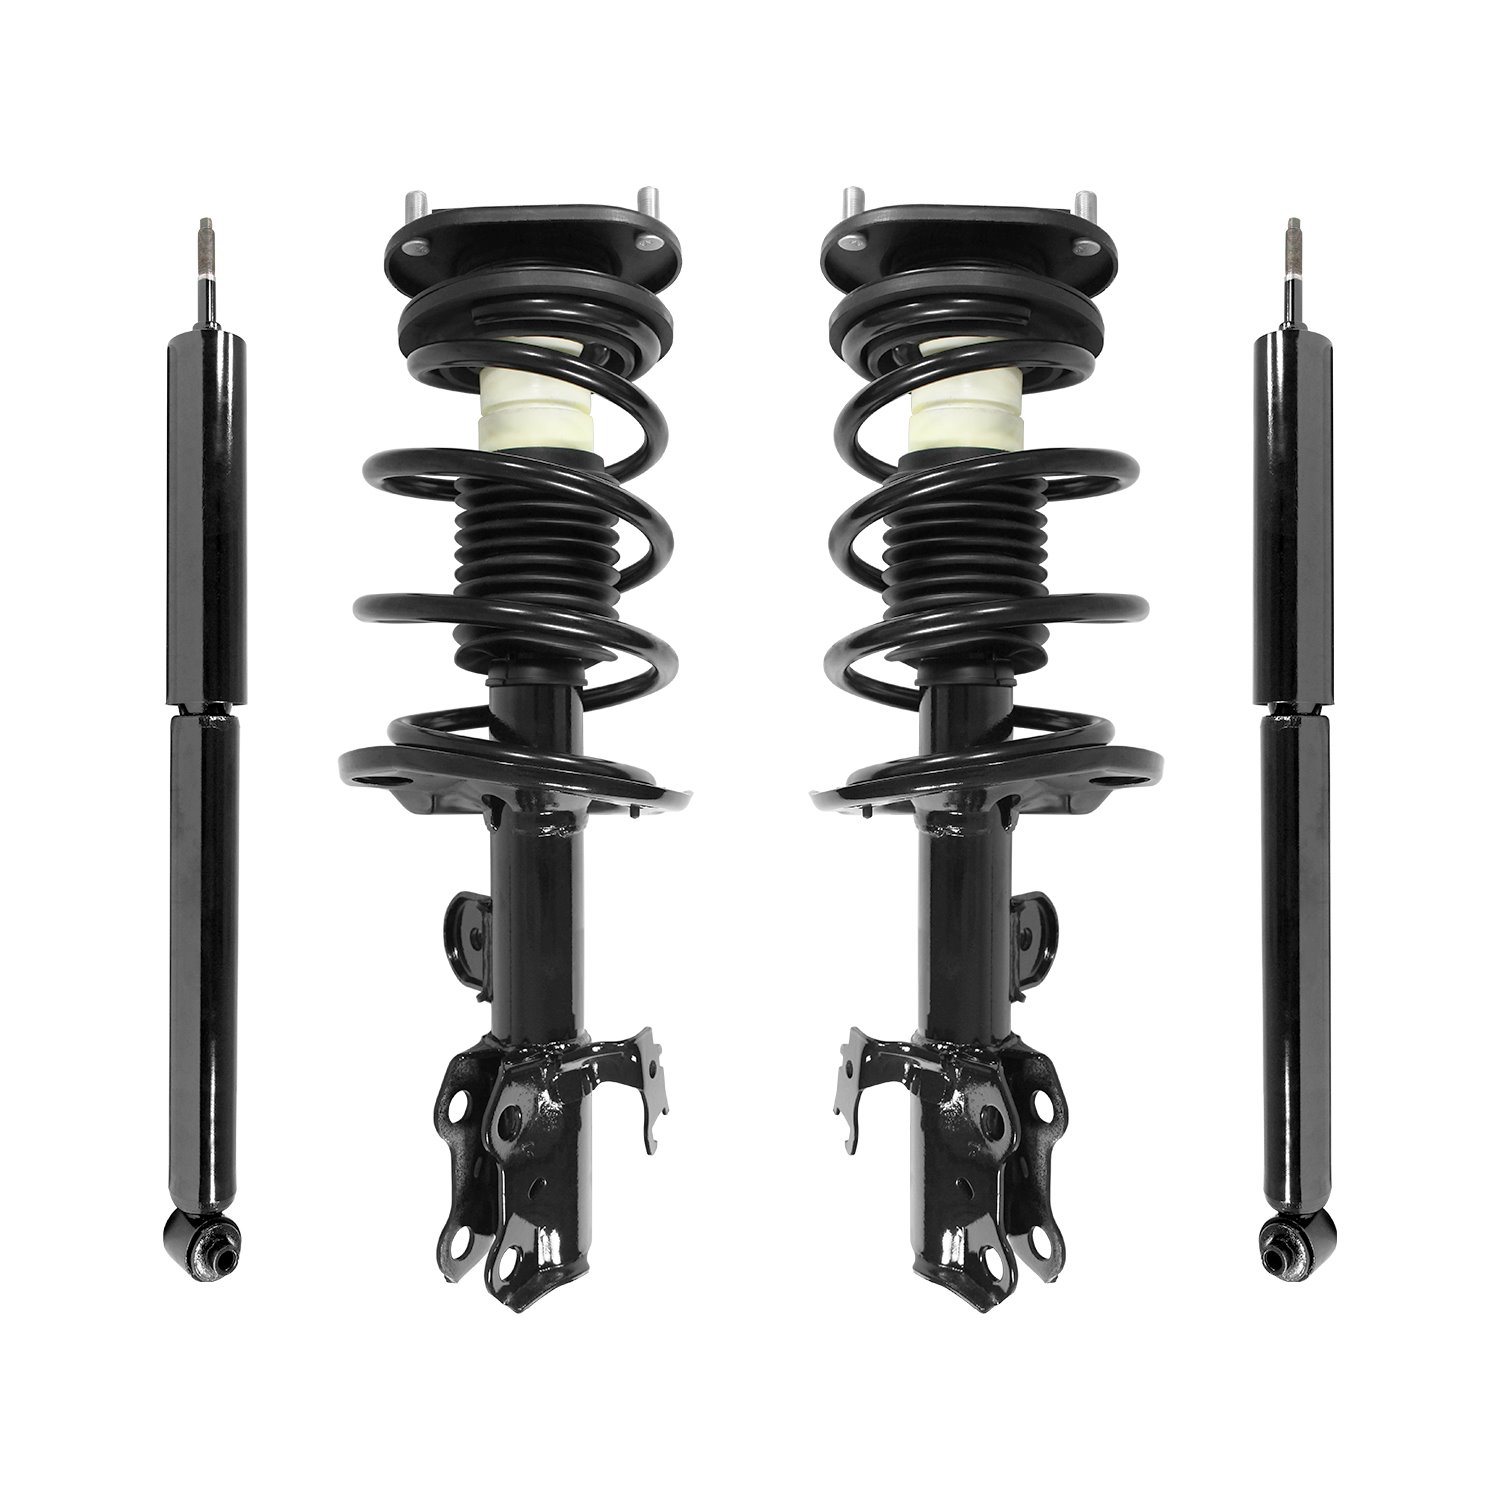 4-11421-259360-001 Front & Rear Suspension Strut & Coil Spring Assembly Fits Select Scion xB